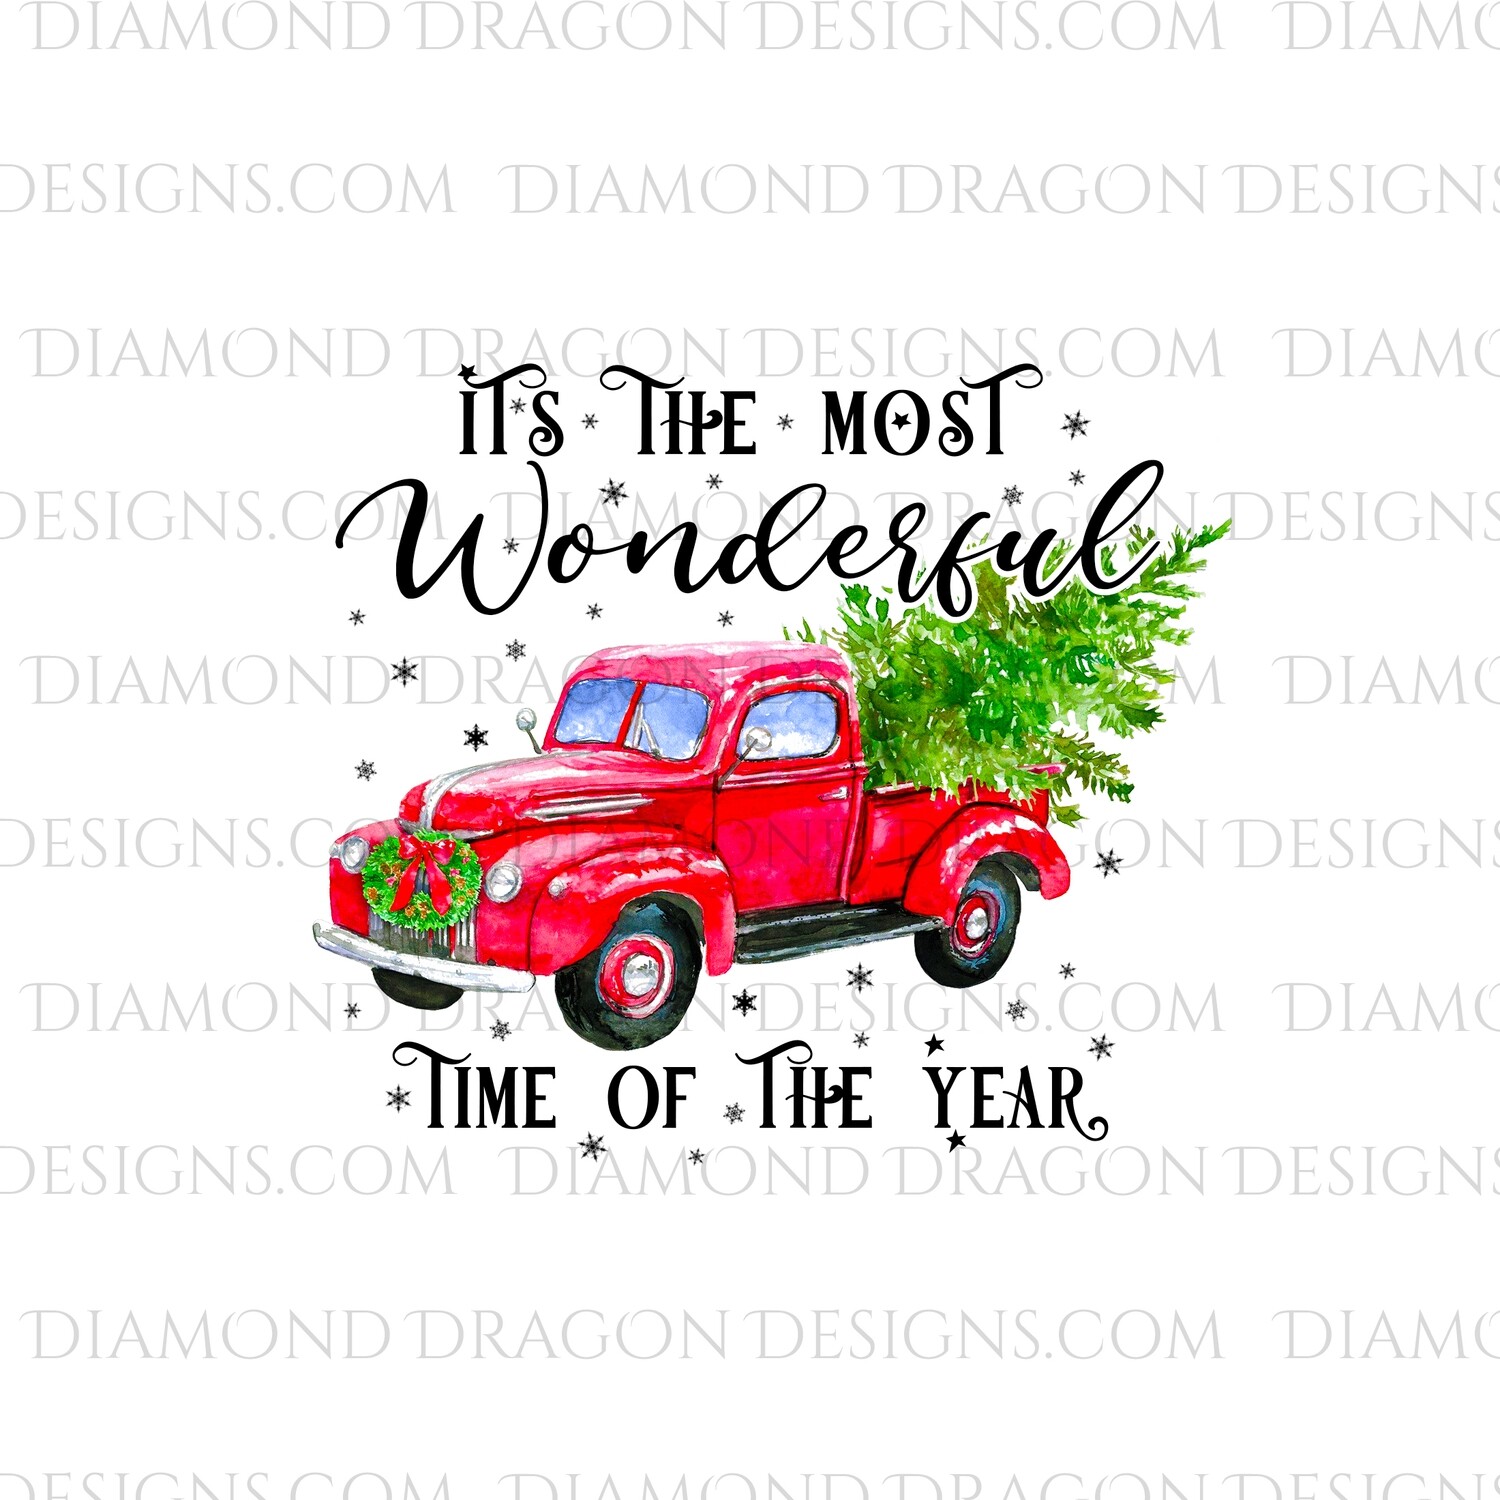 Christmas - Red Truck, Christmas Tree, It’s the most wonderful time, Red Vintage Truck 3, Waterslide